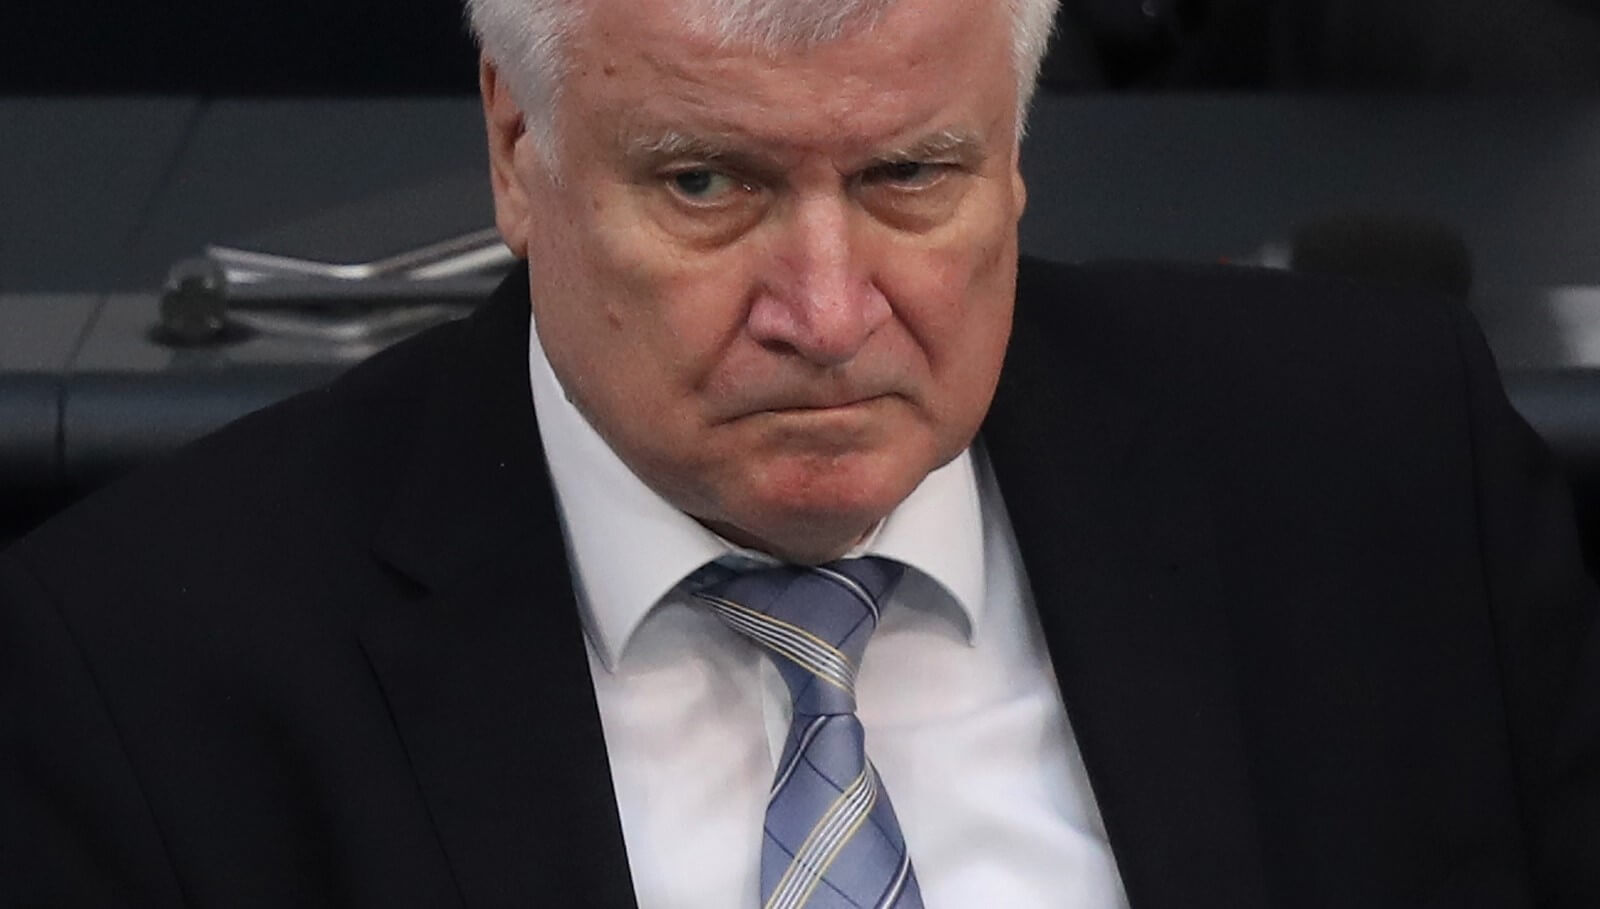 German Interior Minister and leader of the Bavarian Social Union Horst Seehofer, 3 July 2018 (Photo: Sean Gallup/Getty)